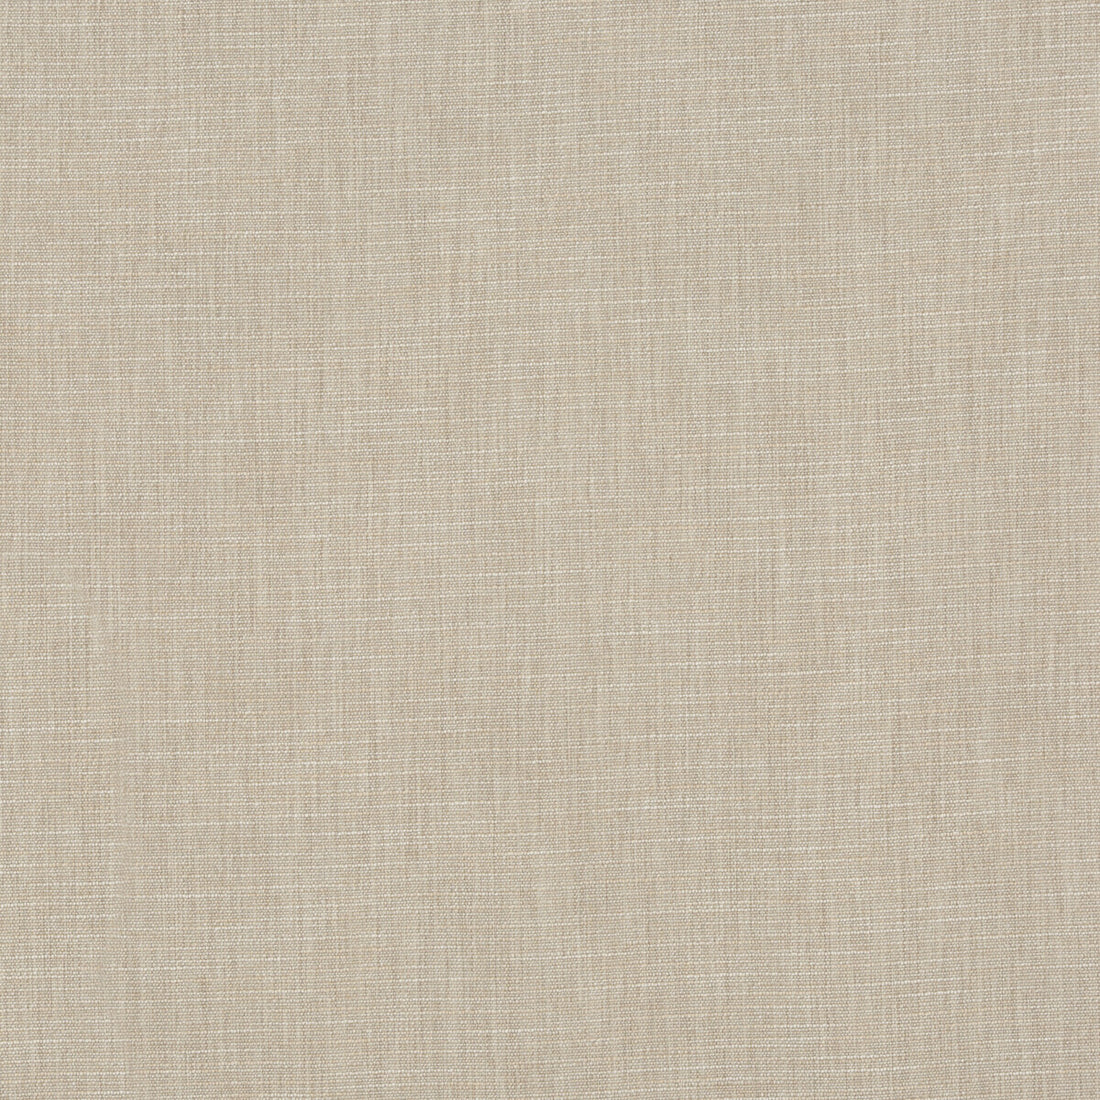 Kinnerton fabric in oatmeal color - pattern PF50414.230.0 - by Baker Lifestyle in the Notebooks collection